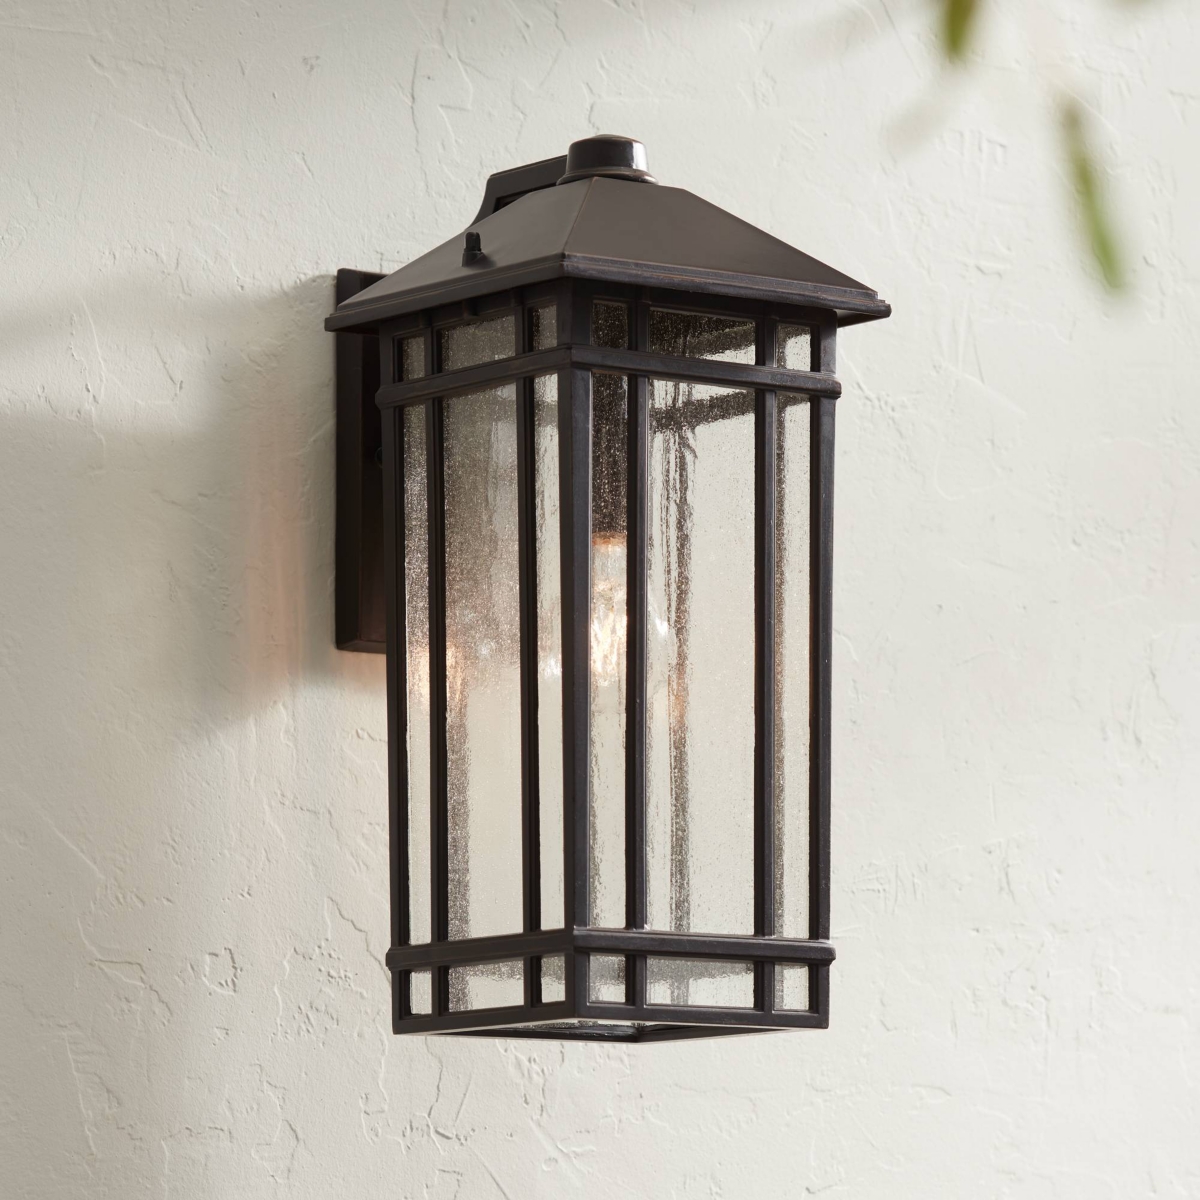 Sierra Craftsman Art Deco Outdoor Wall Light Fixture Rubbed Bronze Brown Steel 16 1/2" Seedy Glass Panels for Exterior House Porch Patio Outside Deck